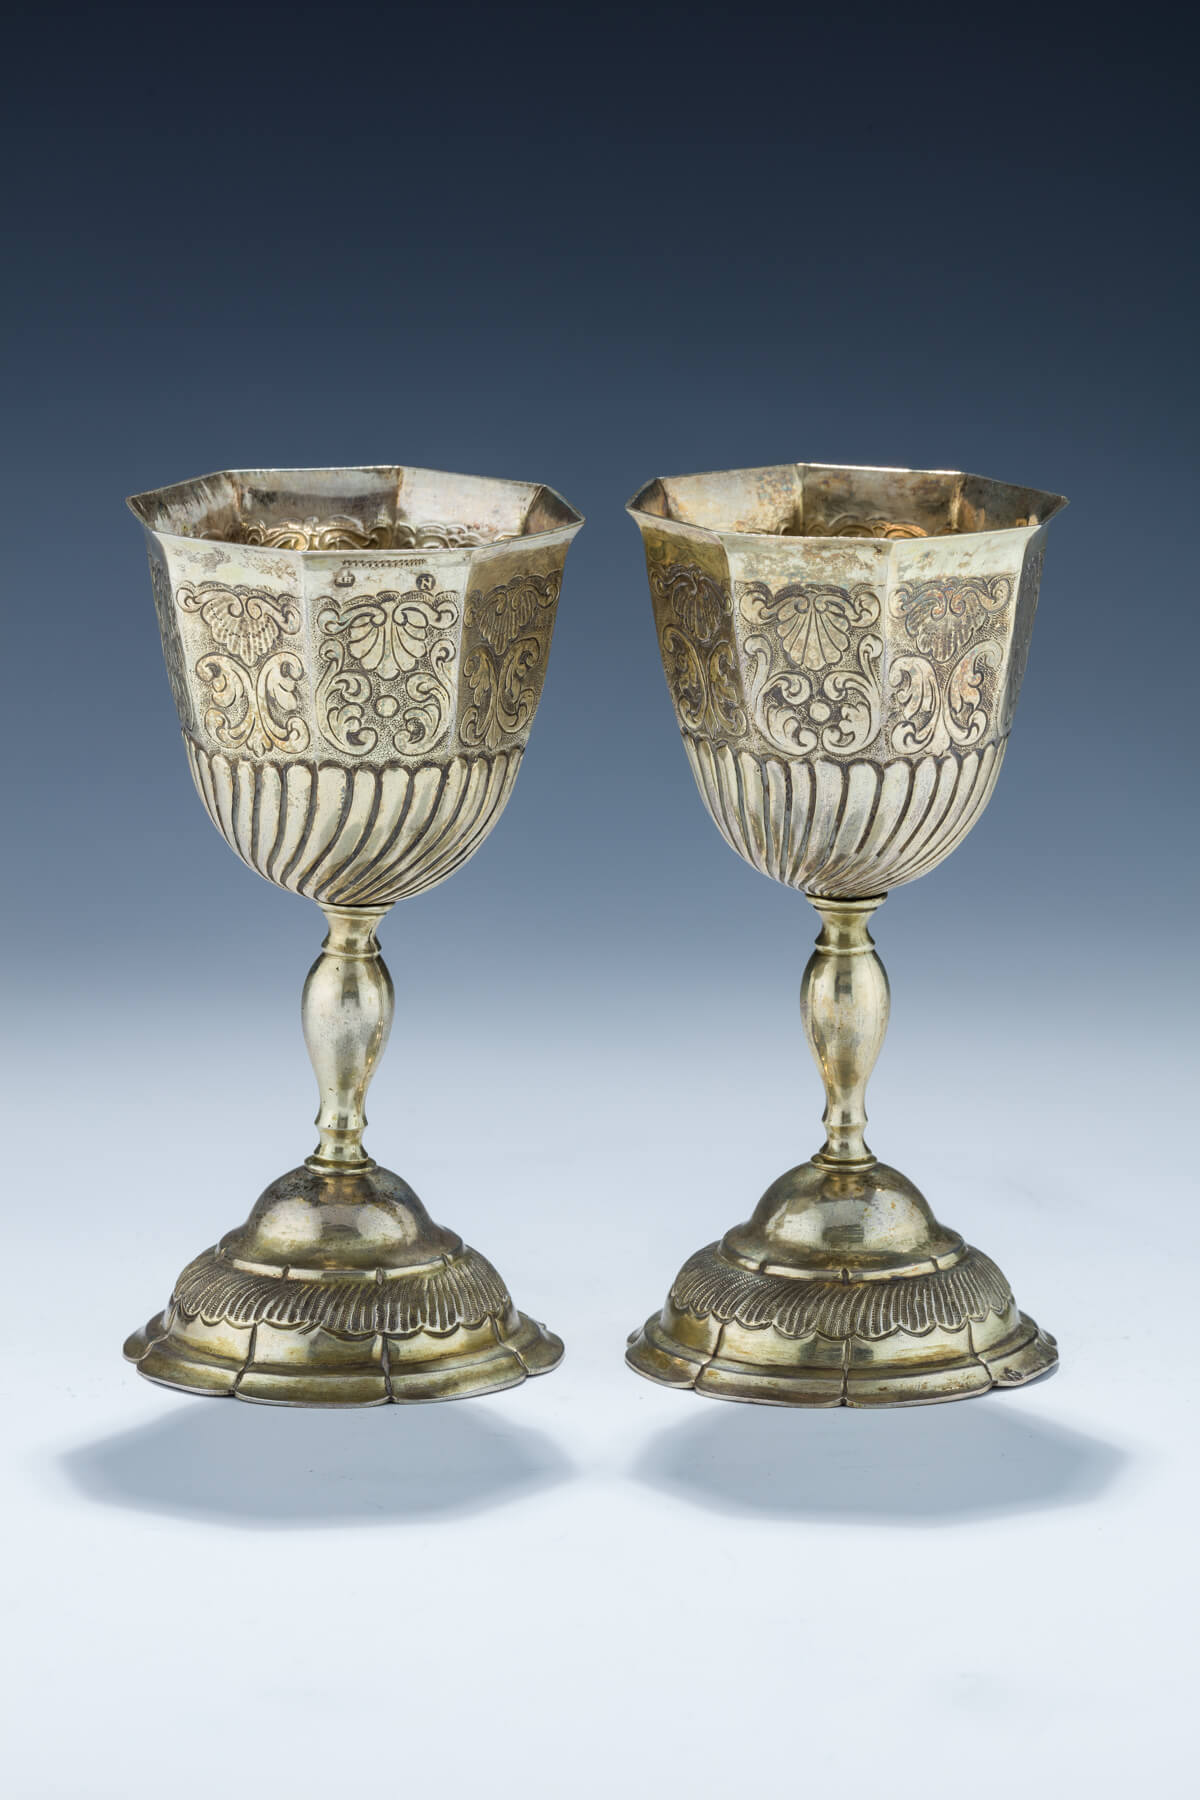 121. A Rare And Important Pair of Gilt Silver Kiddush Goblets